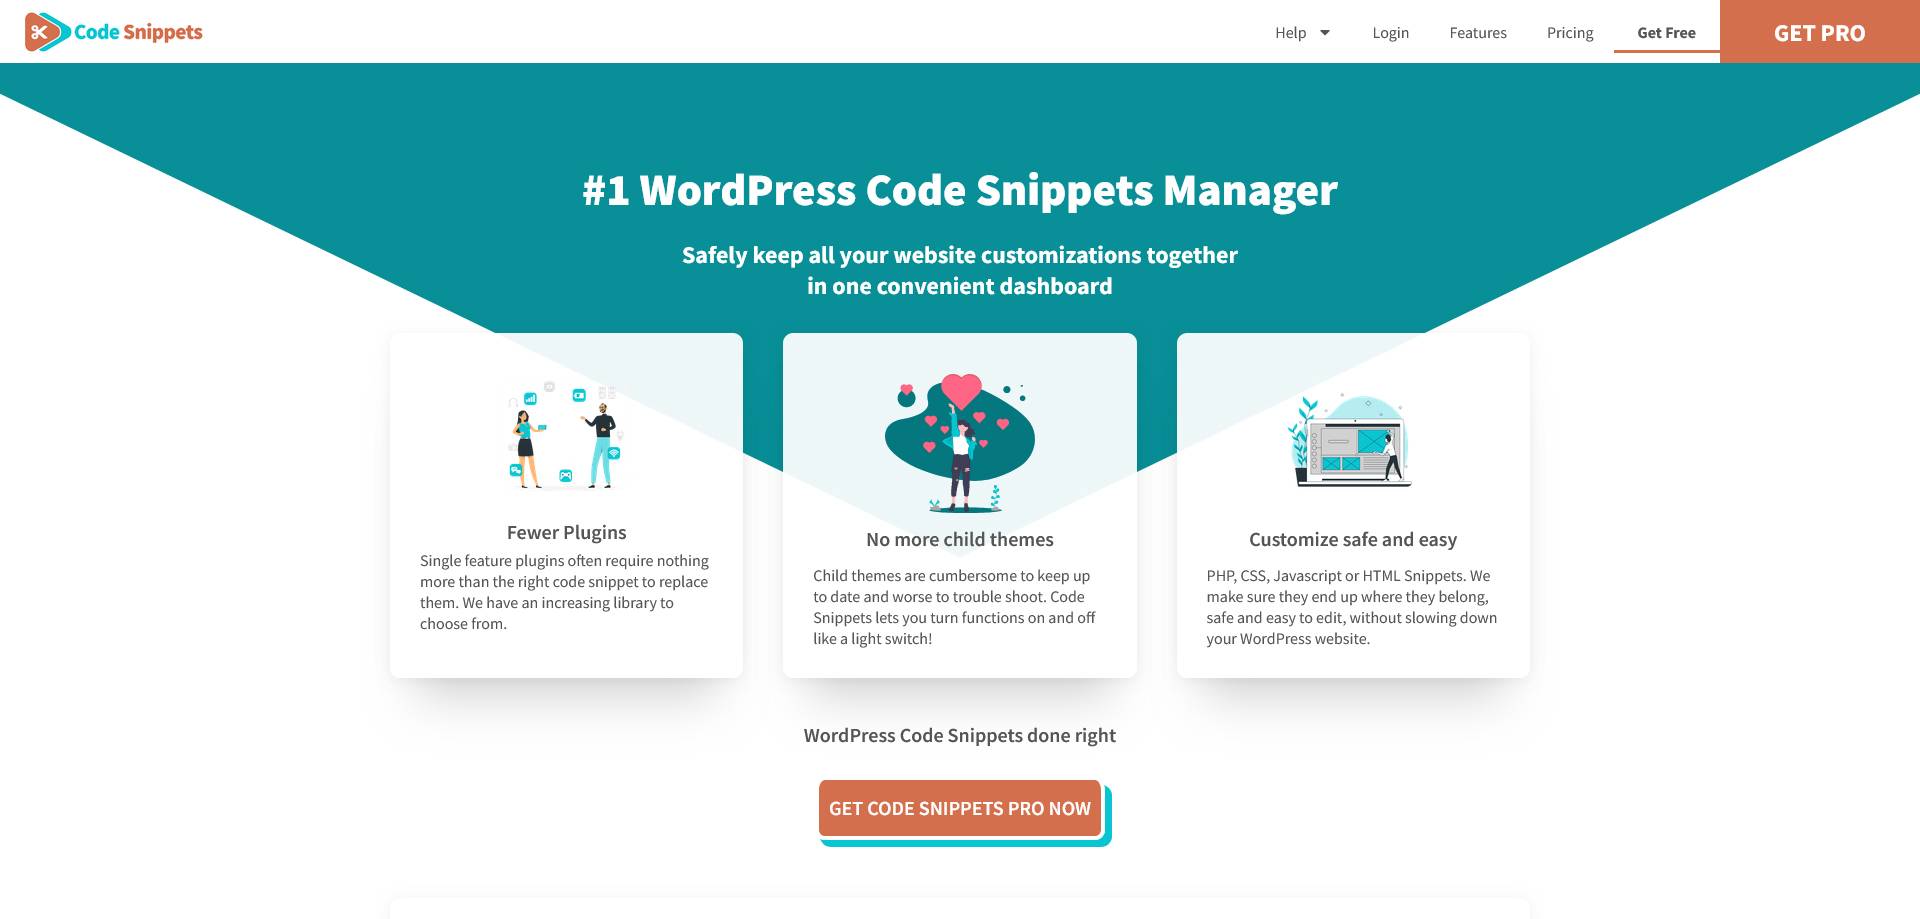 Code Snippets - WordPress Code Snippets Manager